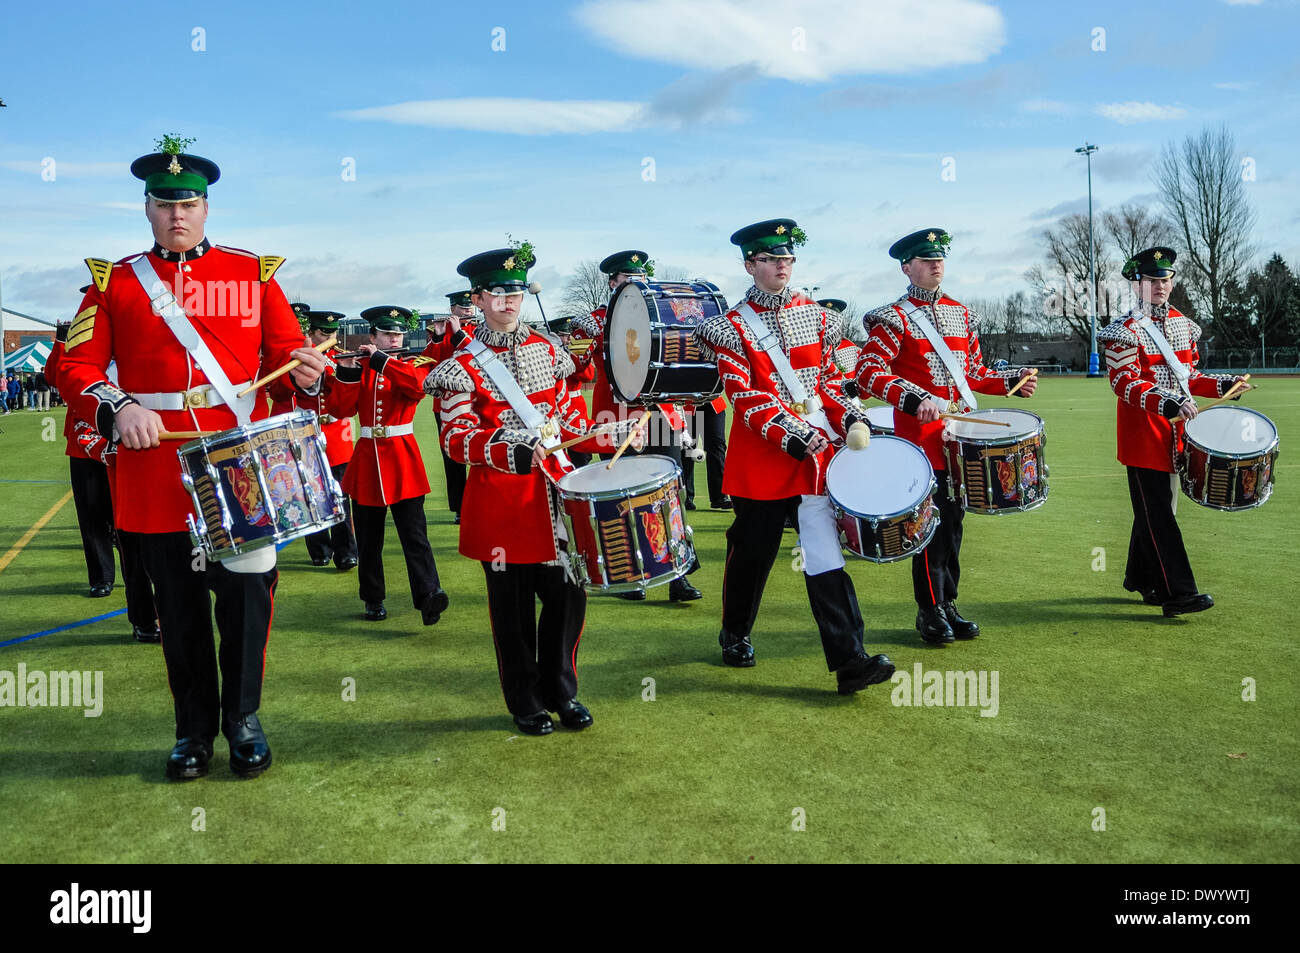 Lisburn, Northern Ireland. 15 Mar 2014 - The band of the Royal Irish Regiment Army Cadets march at the Shamrock Presentation and Drumhead Service in Thiepval Barracks. Credit:  Stephen Barnes/Alamy Live News. Stock Photo